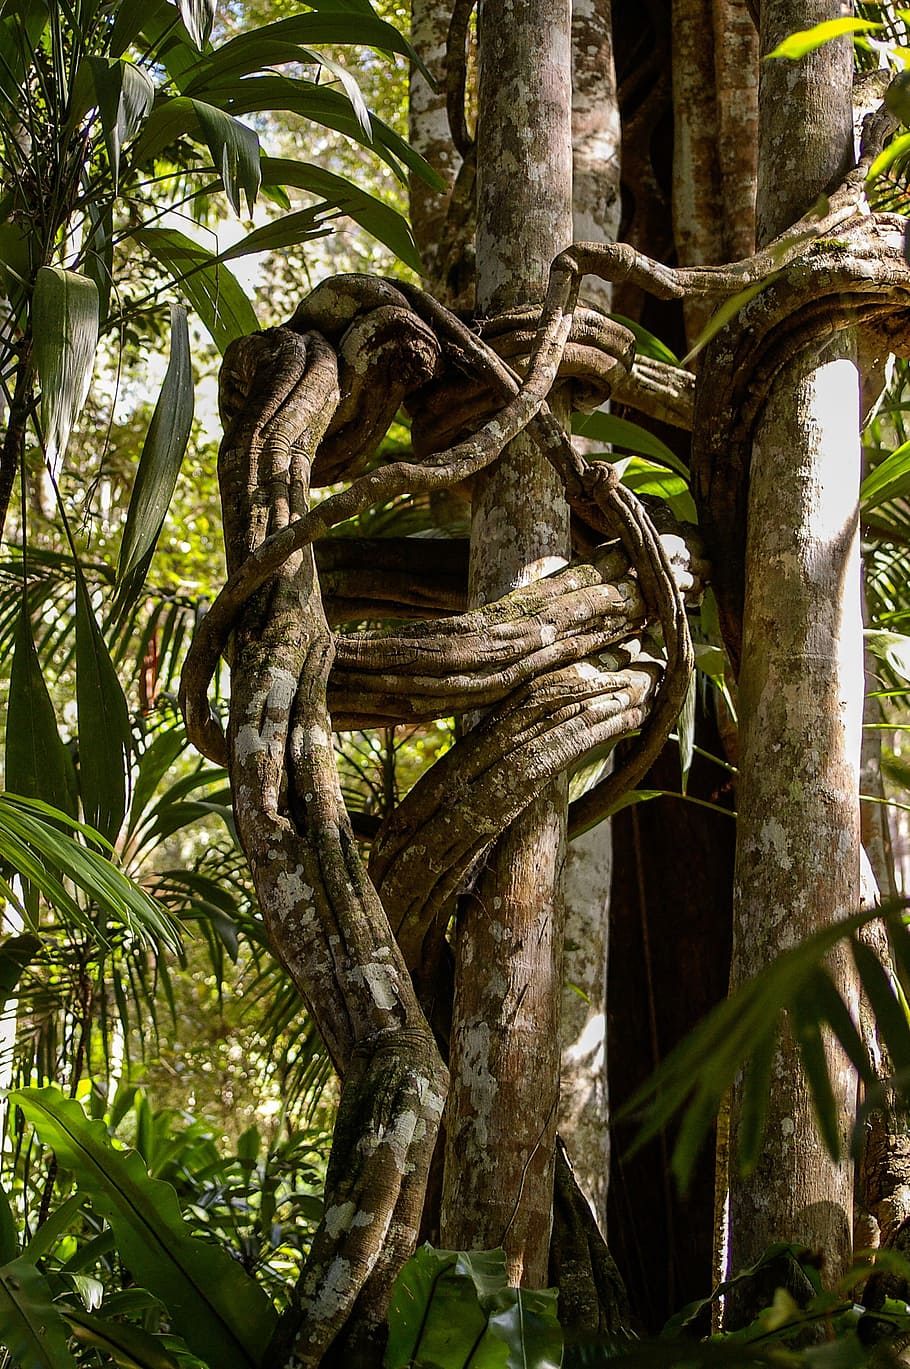 green, leafed, tree photo, strangler fig, jungle, trees, forest, twisted, roots, trunk